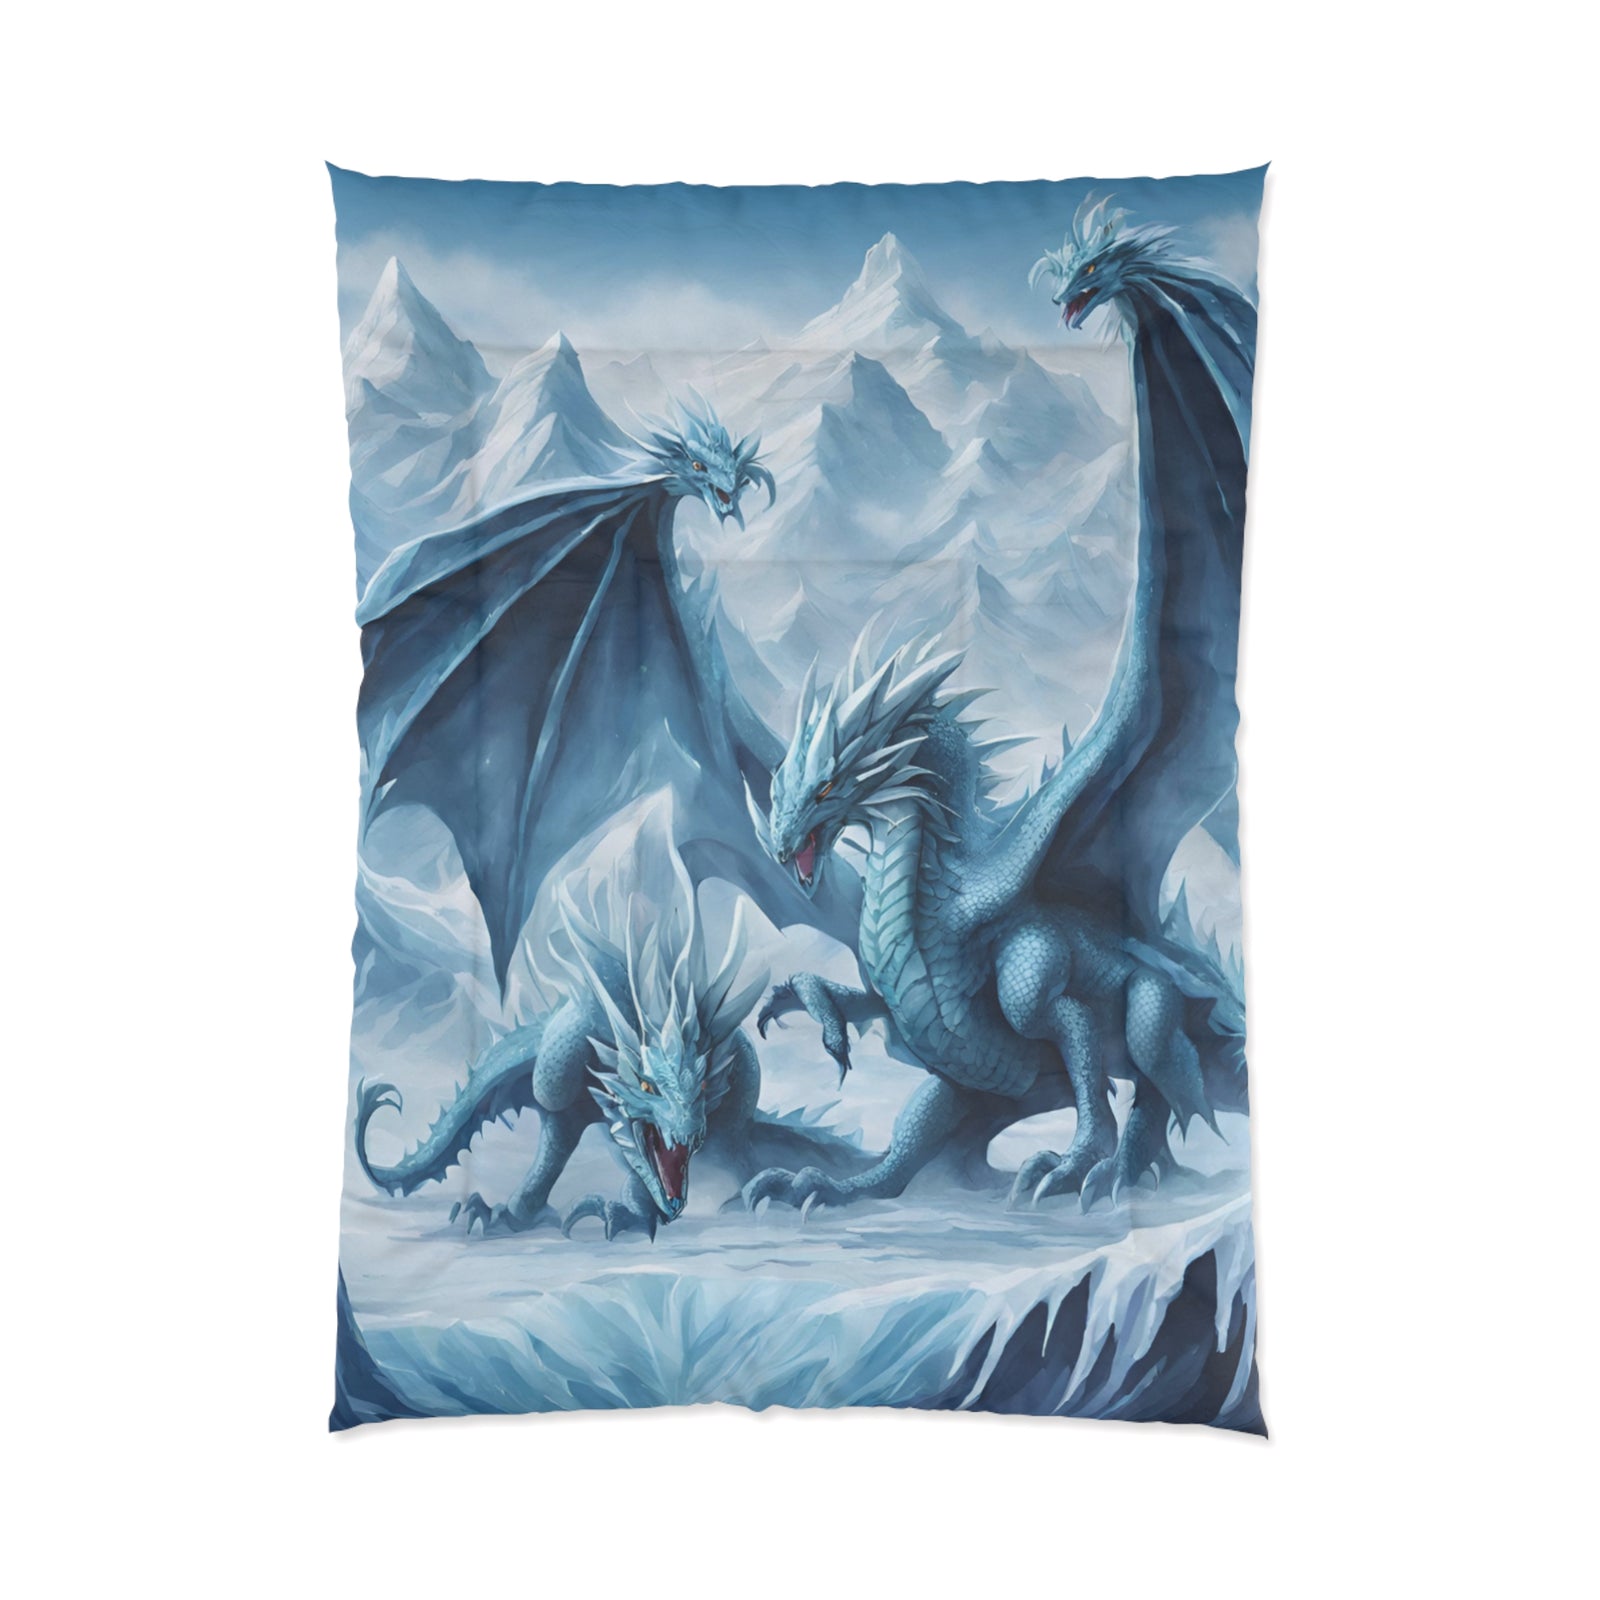 Frosty Fantasy: Ice Dragon, Snow, and Epic Battle Kids' Comforter - Transform the Bedroom into a Winter Wonderland!